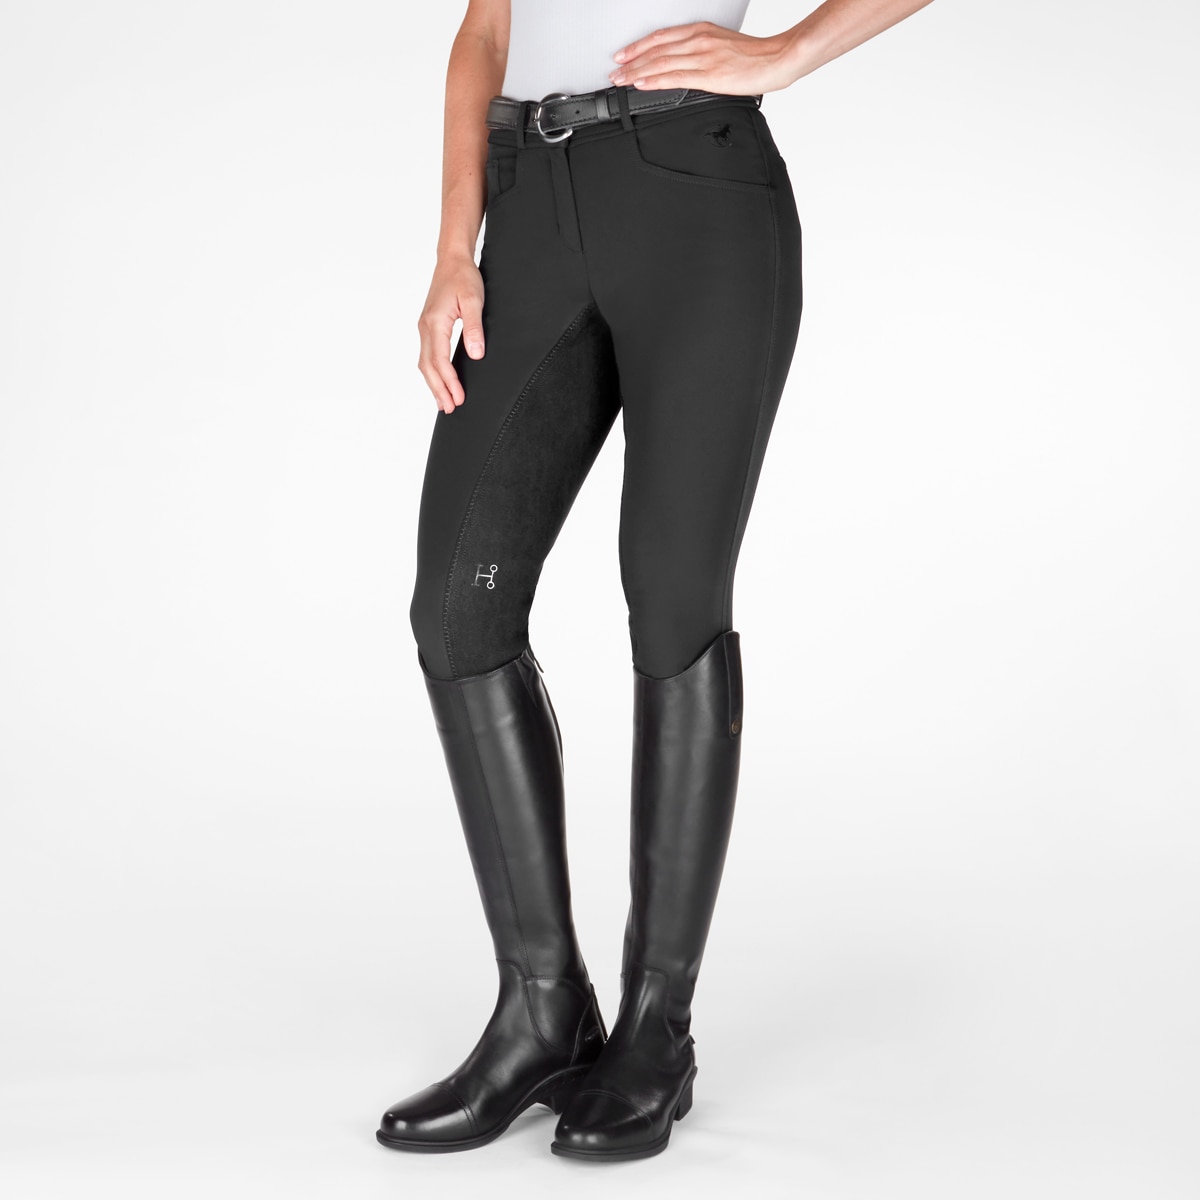 Compression pull-on Riding Breeches Black